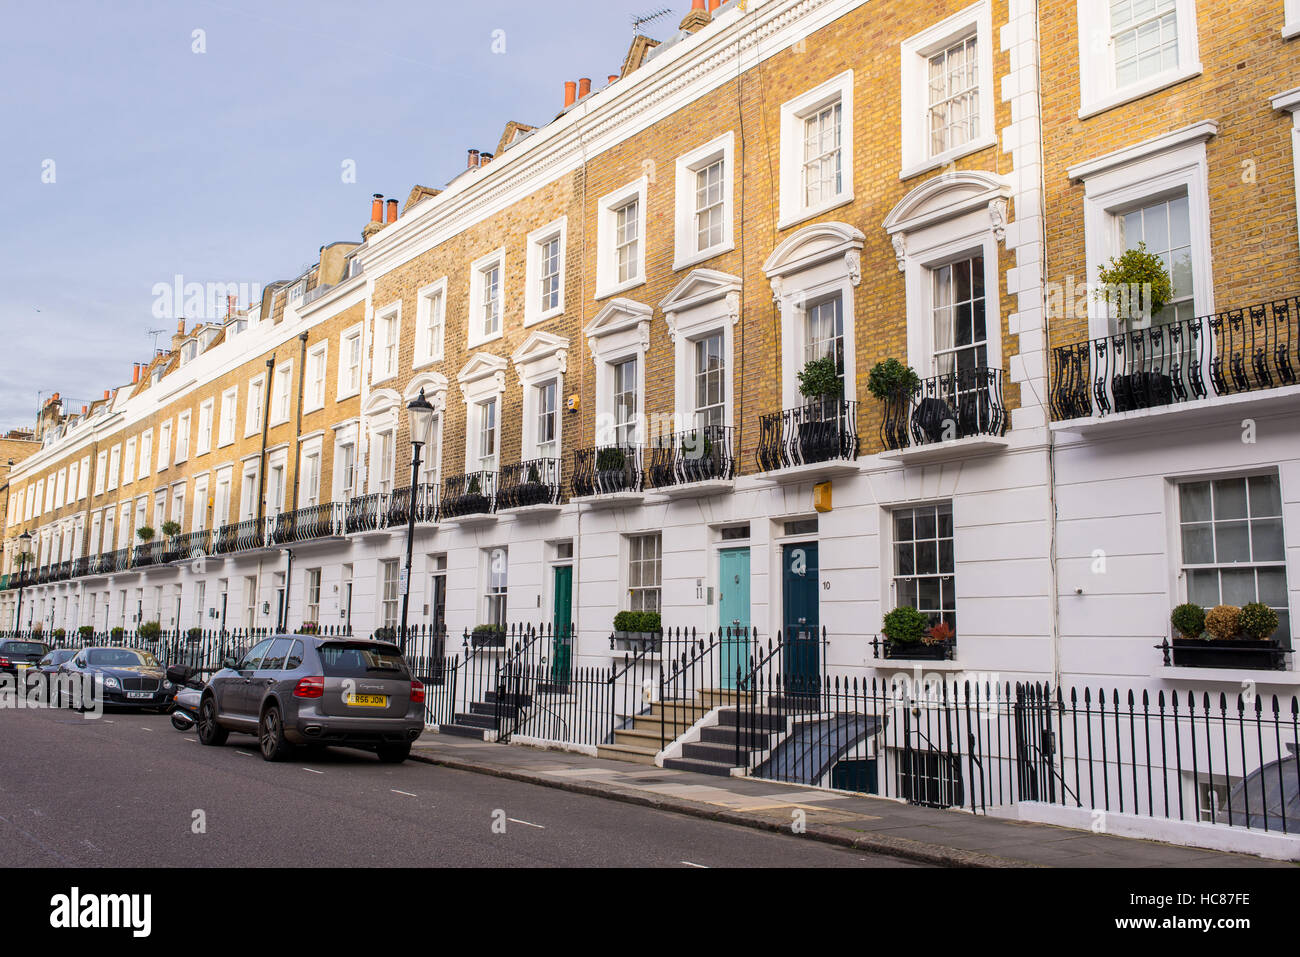 View of an elegant street in the residential area of Chelsea, London, UK with Victorian classic residential buildings and cars parked in front of them Stock Photo